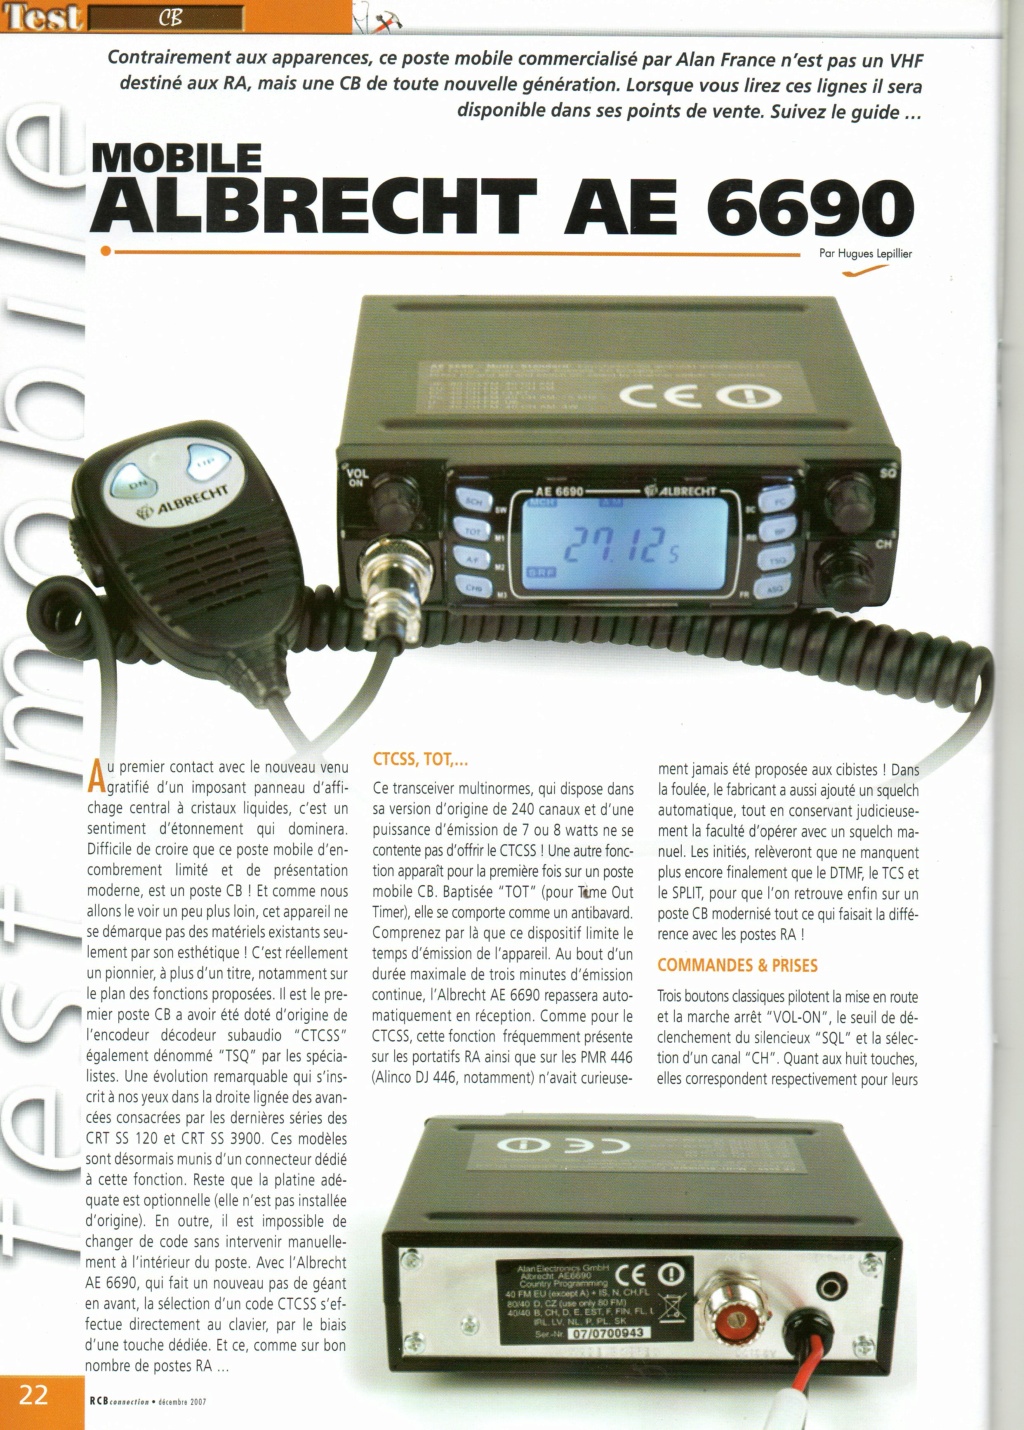 6690 - Albrecht AE 6690 (Mobile & Camping-car) Img61310